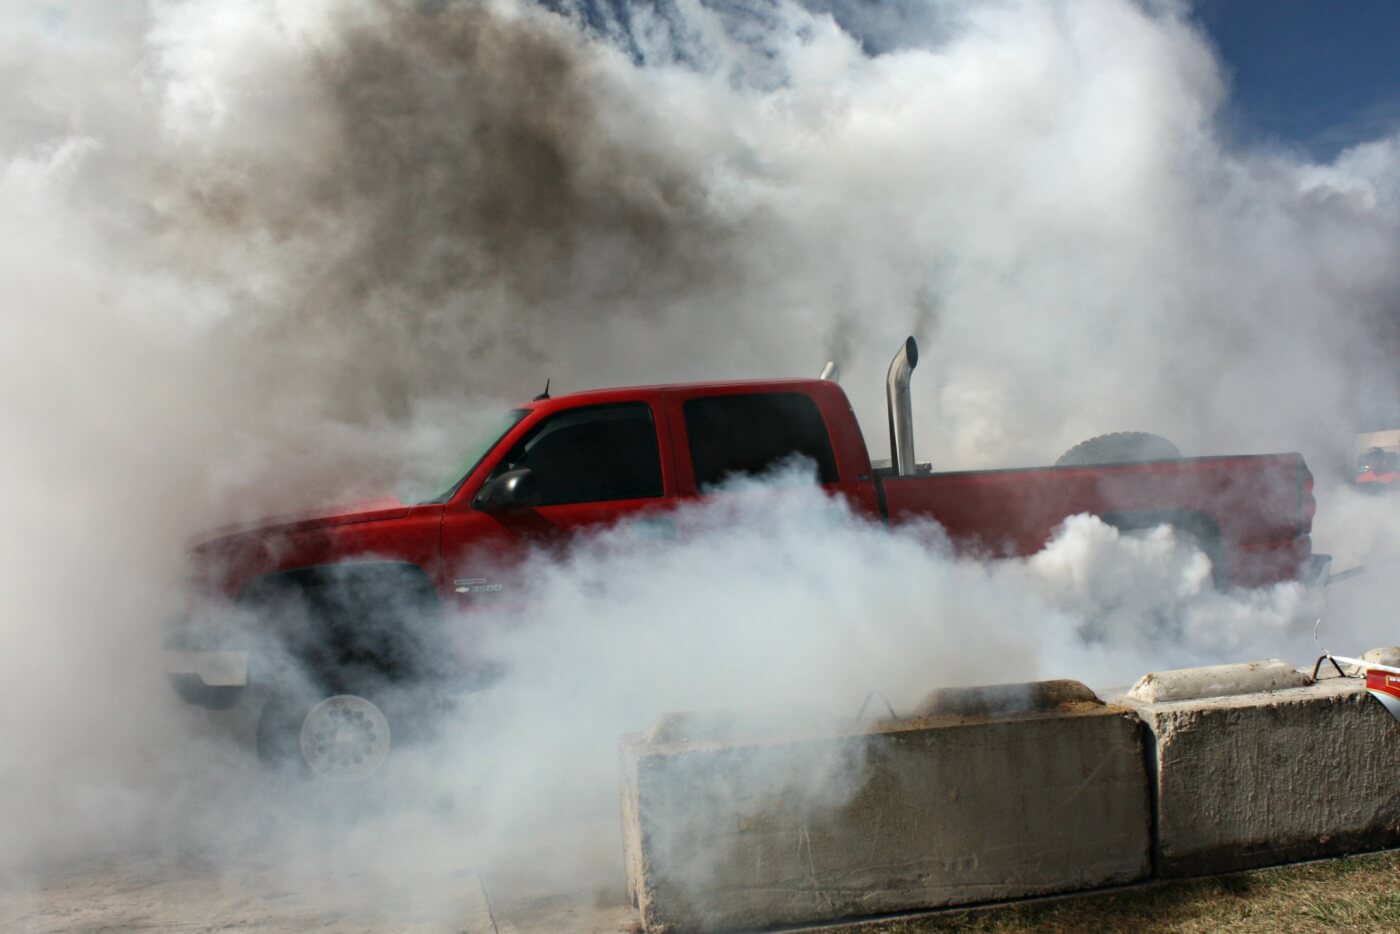 Not a whole lot to say about the burnout contest other than this guy was the obvious winner.